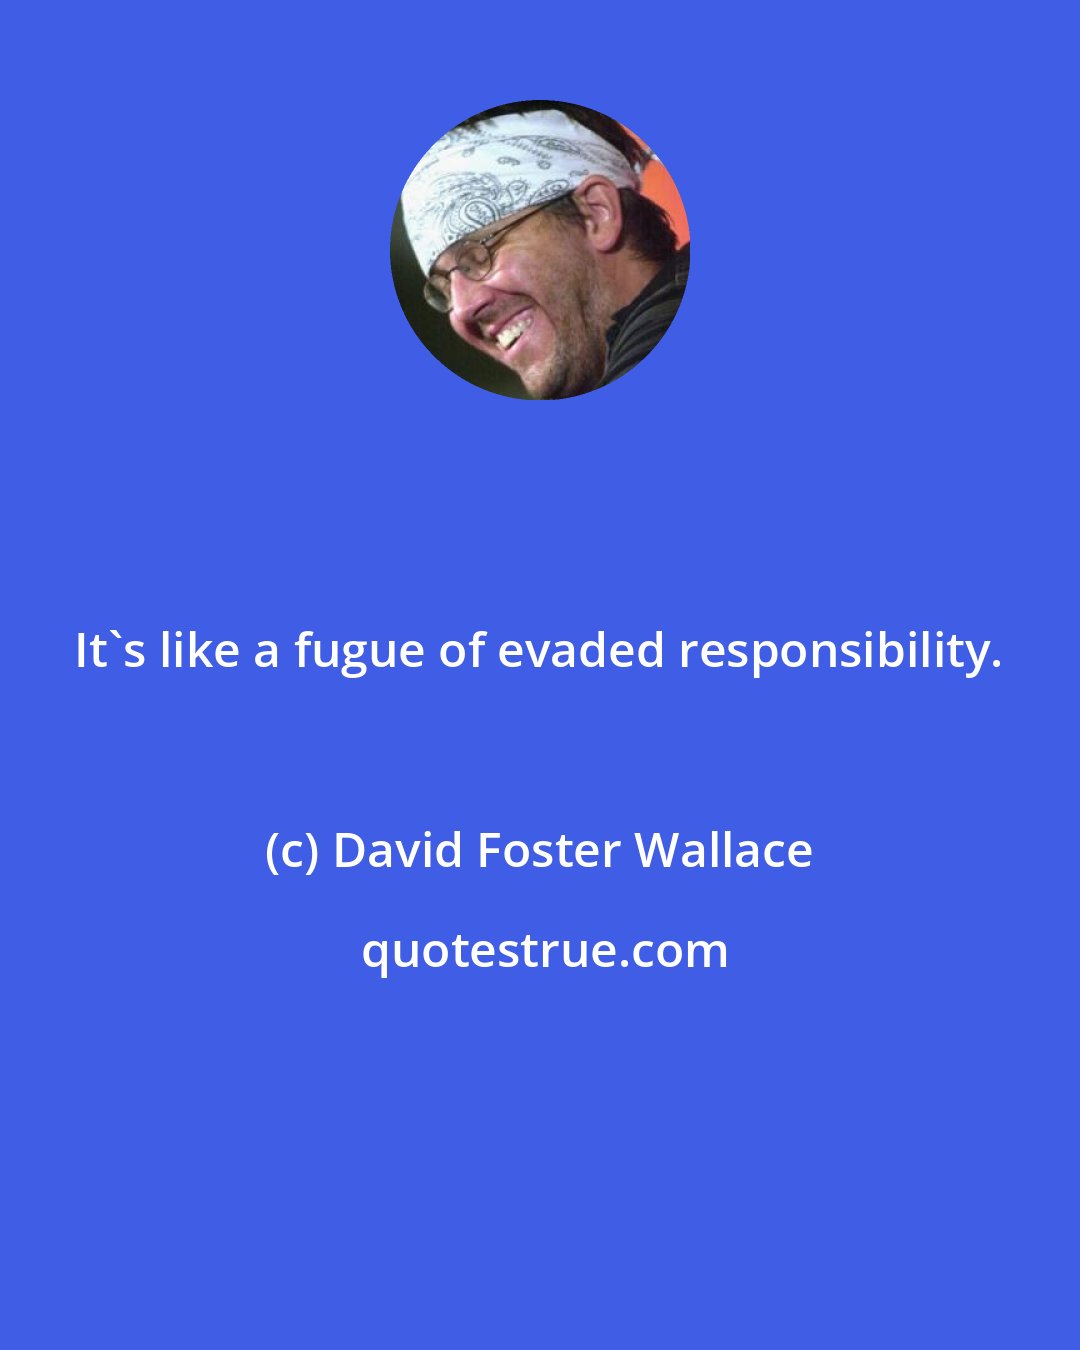 David Foster Wallace: It's like a fugue of evaded responsibility.